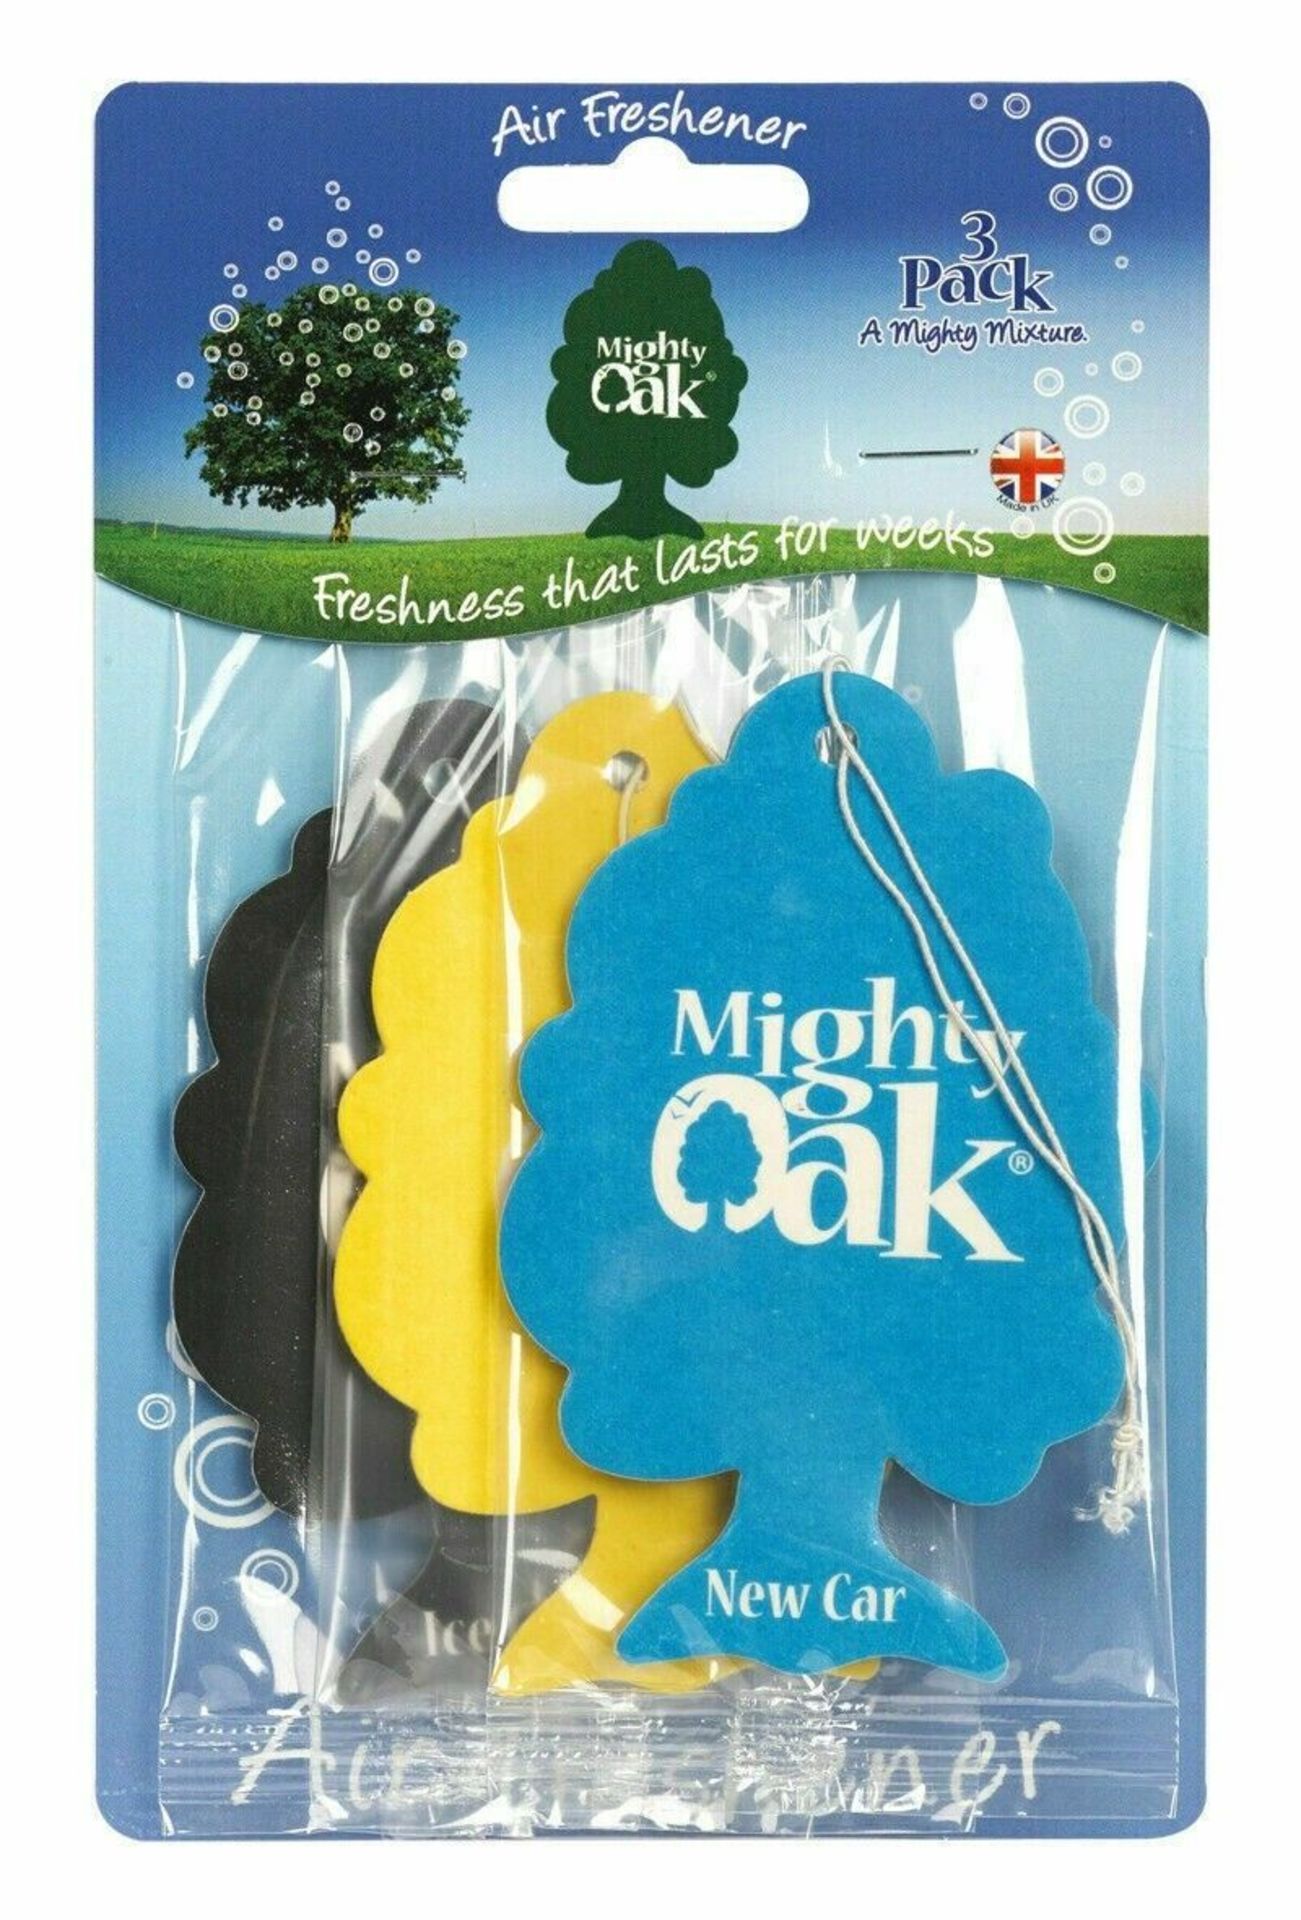 PALLET TO CONTAIN 720 X BRAND NEW PACKS OF 3 MIGHTY OAK CAR AIR FRESHENERS. RRP £3.99 PER PACK (